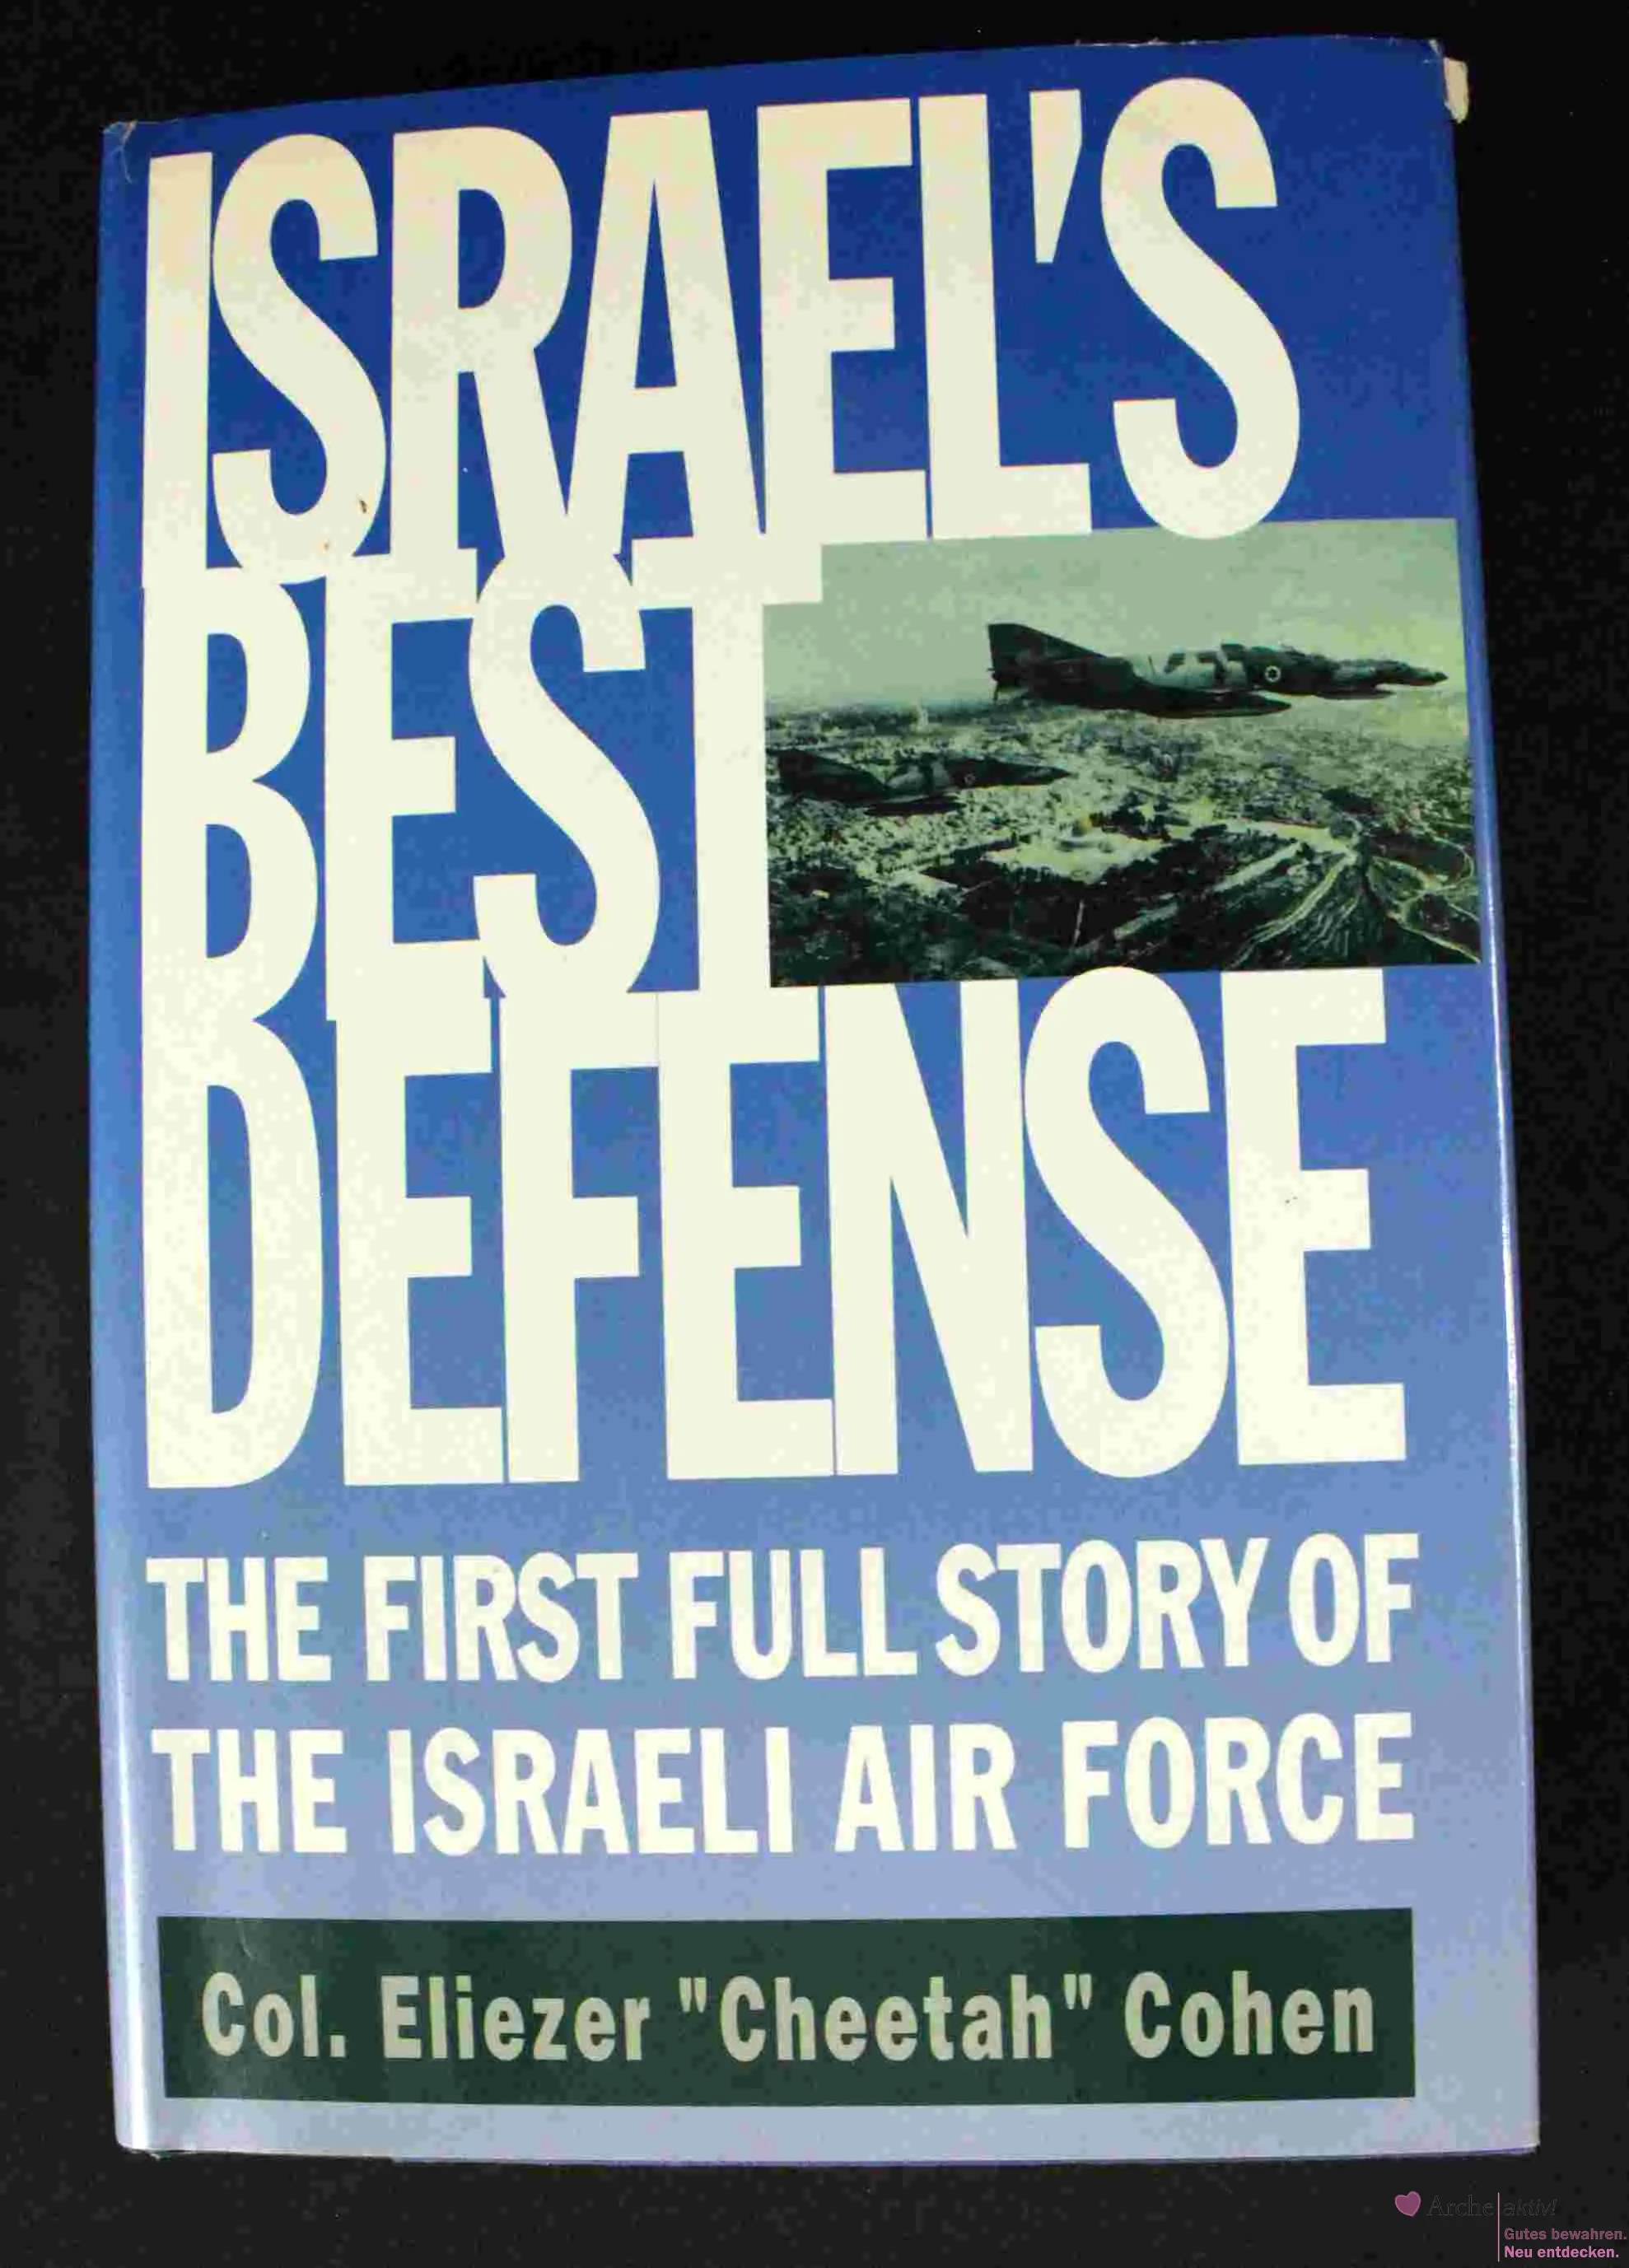 Israel's best Defense - The first full Story of the Israeli Air Force, gebraucht